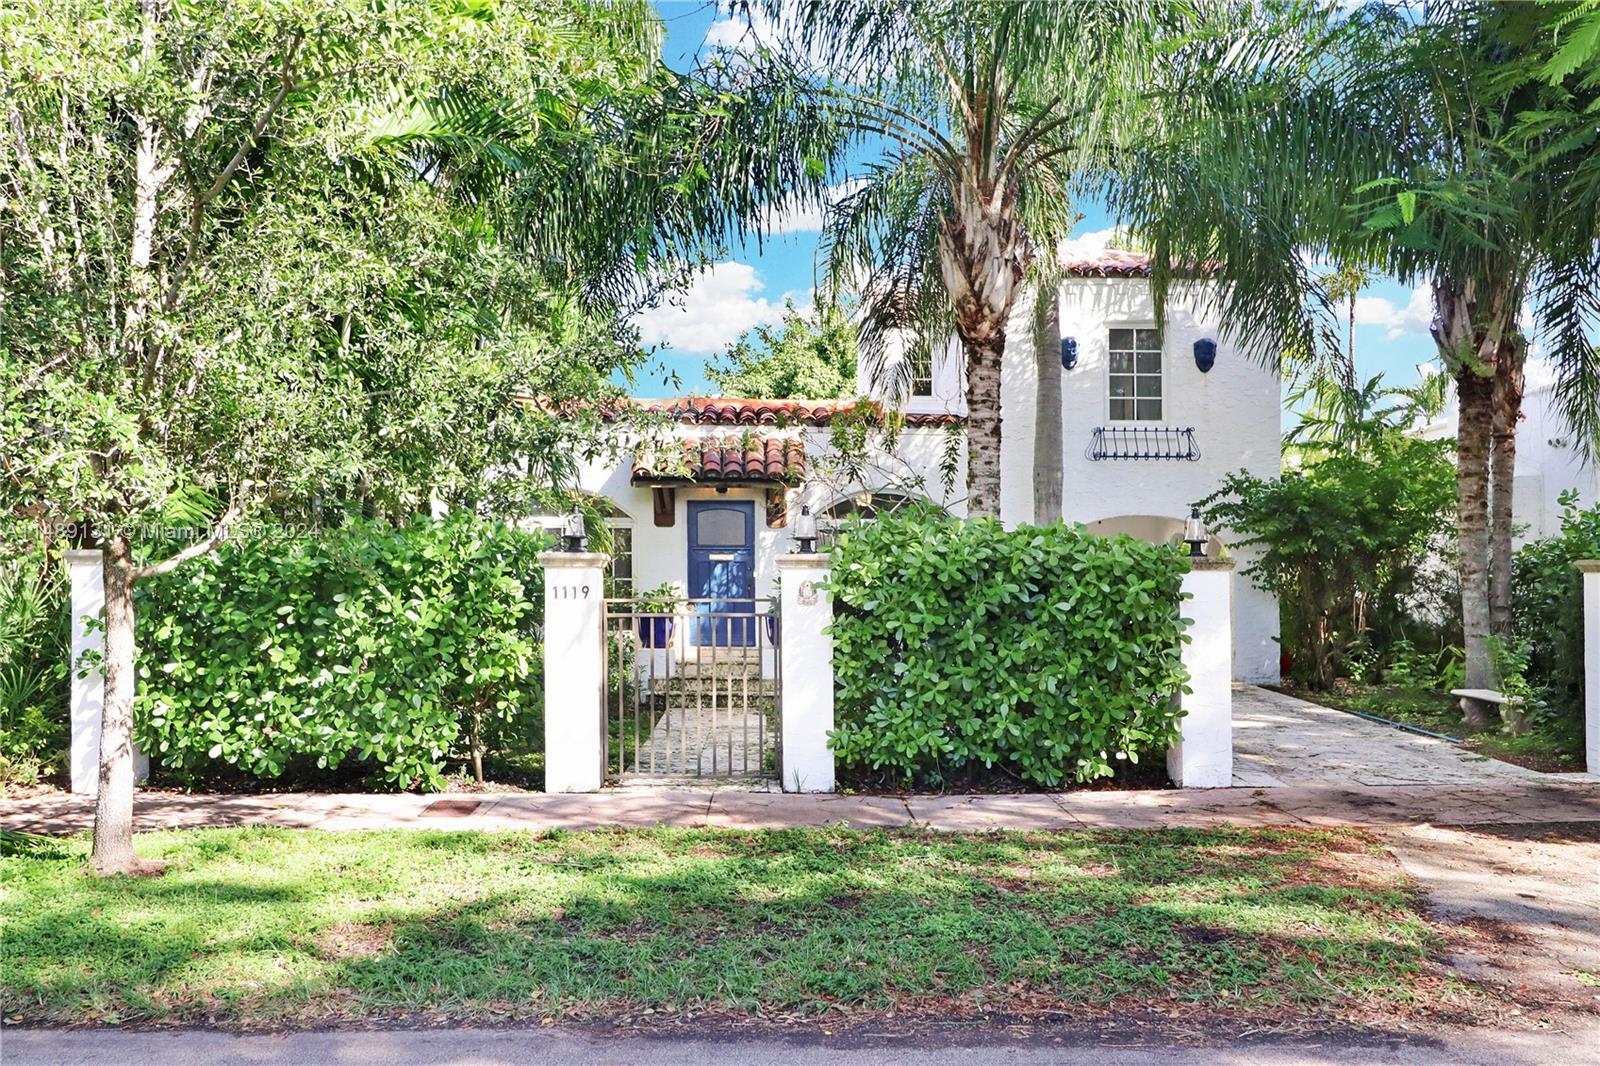 Photo of 1119 Lisbon St in Coral Gables, FL